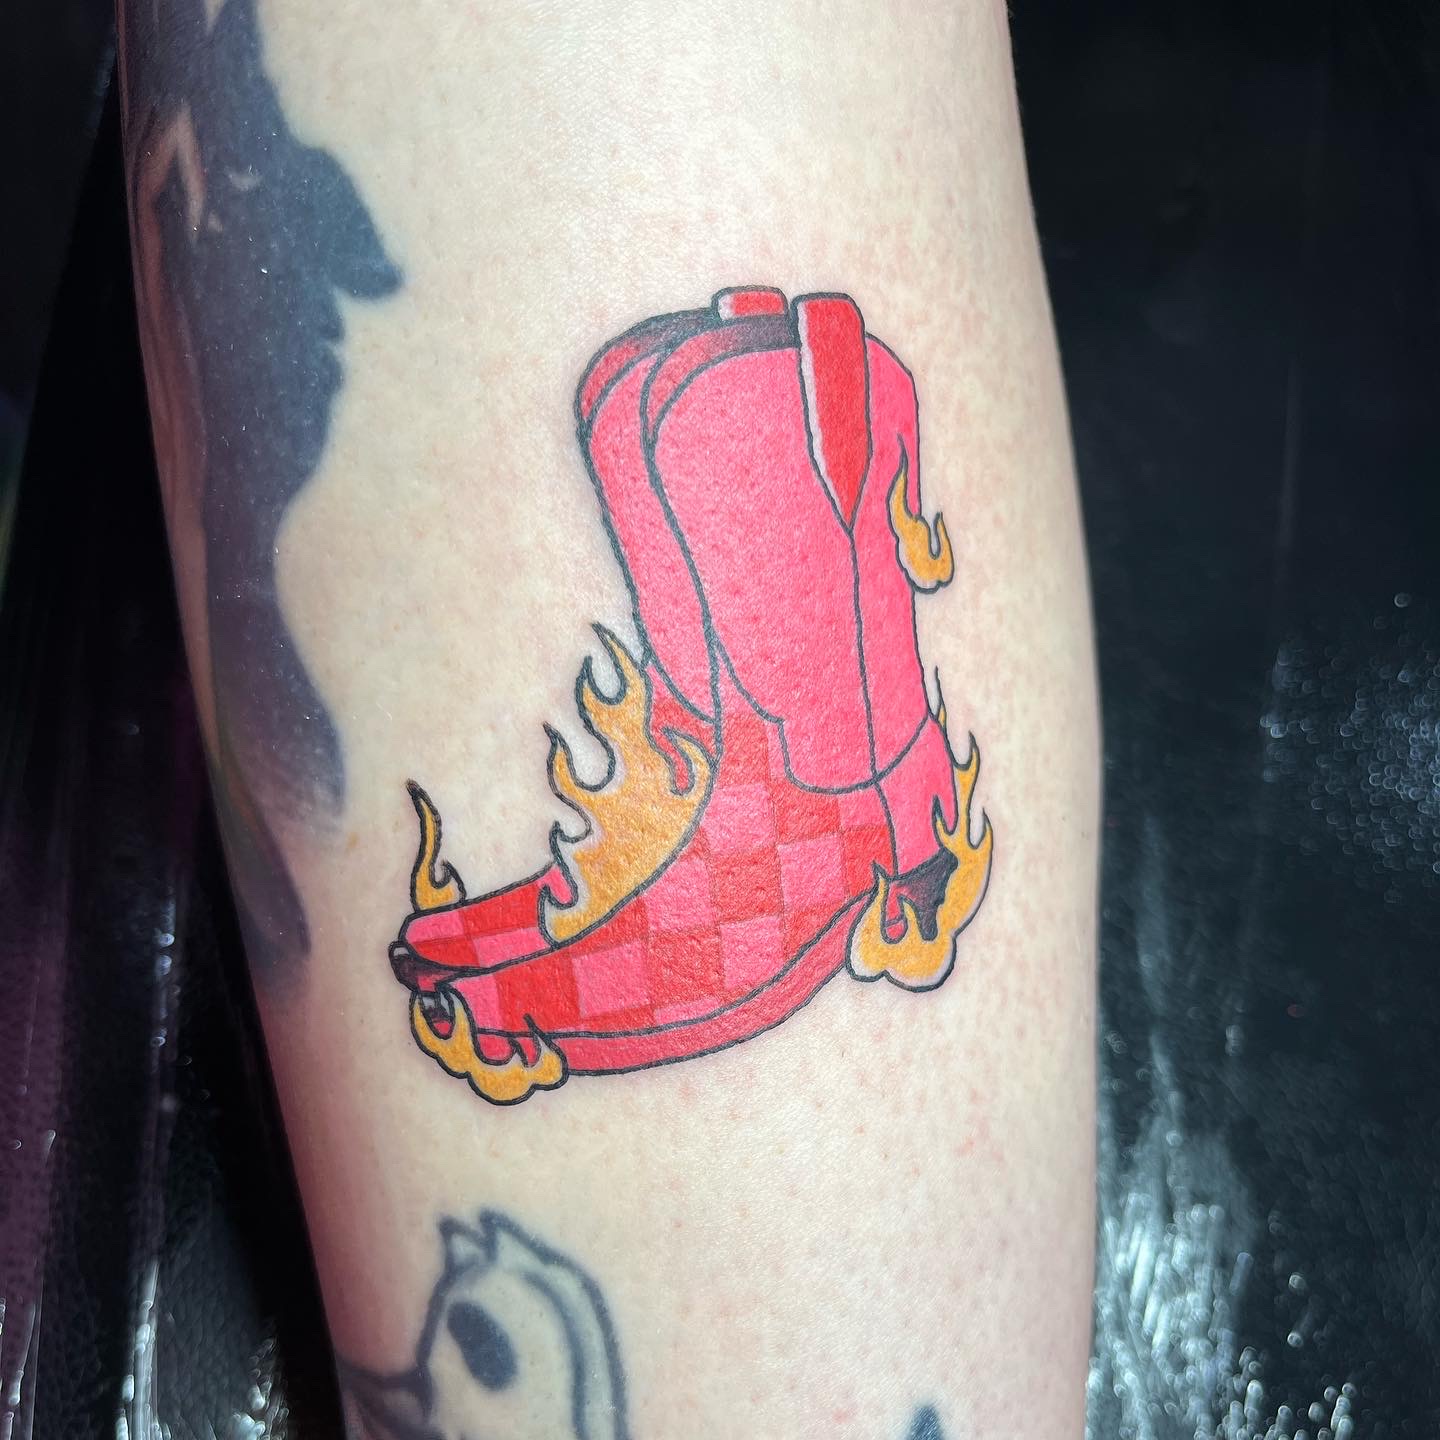 My first chili peppers tattoo! (The heavy wing) : r/RedHotChiliPeppers